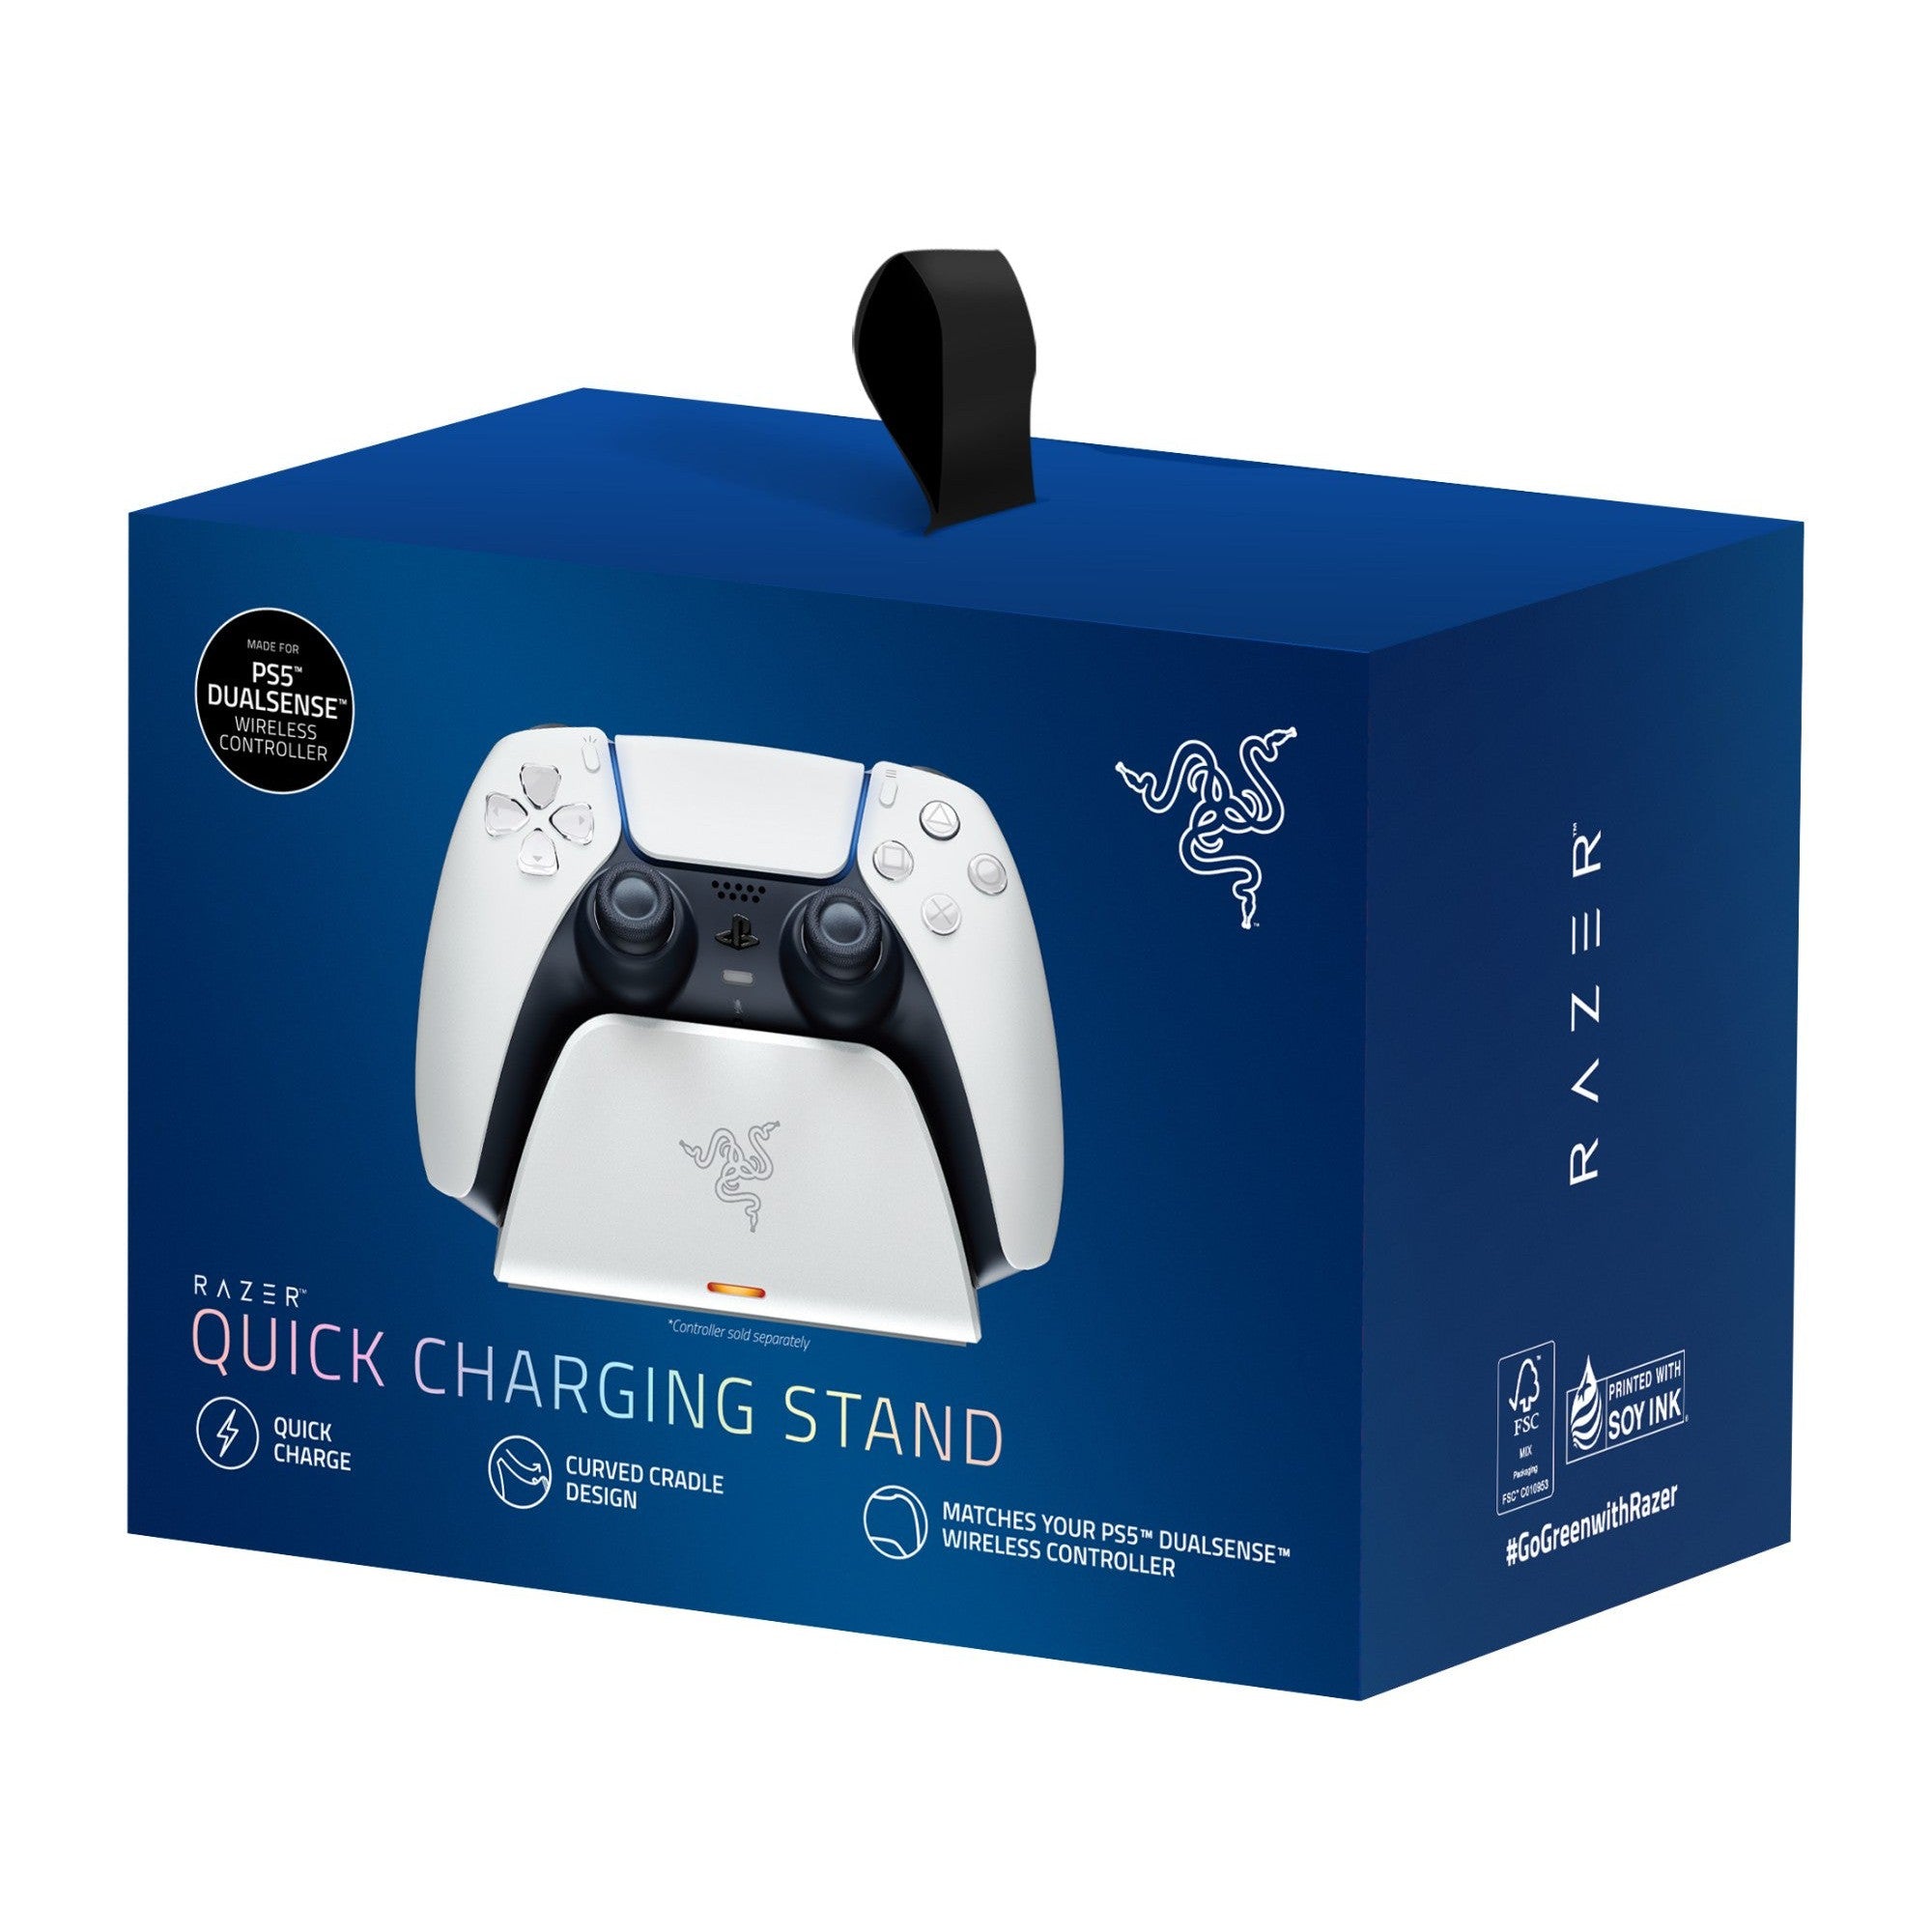 Razer Universal Quick Charging Stand For PS5 - White